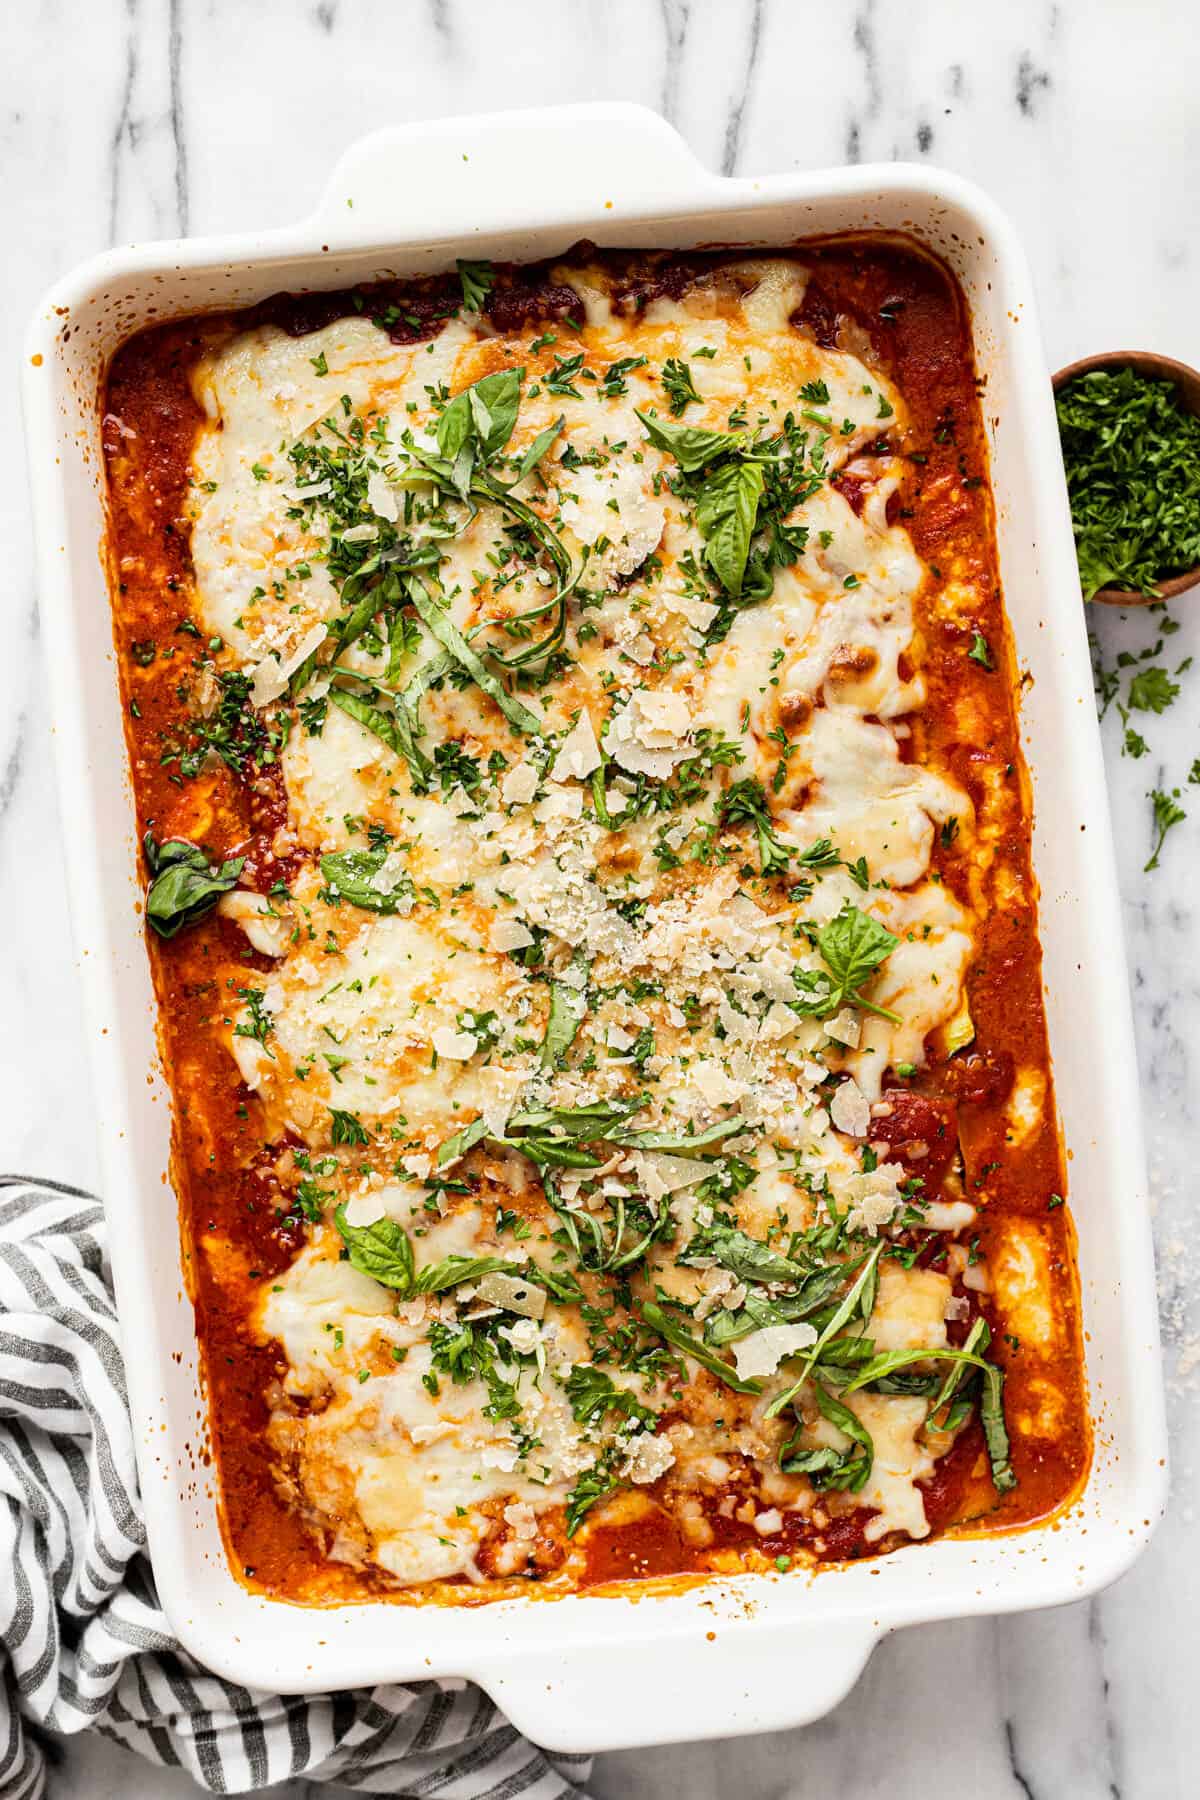 Large white pan filled with homemade zucchini lasagna.